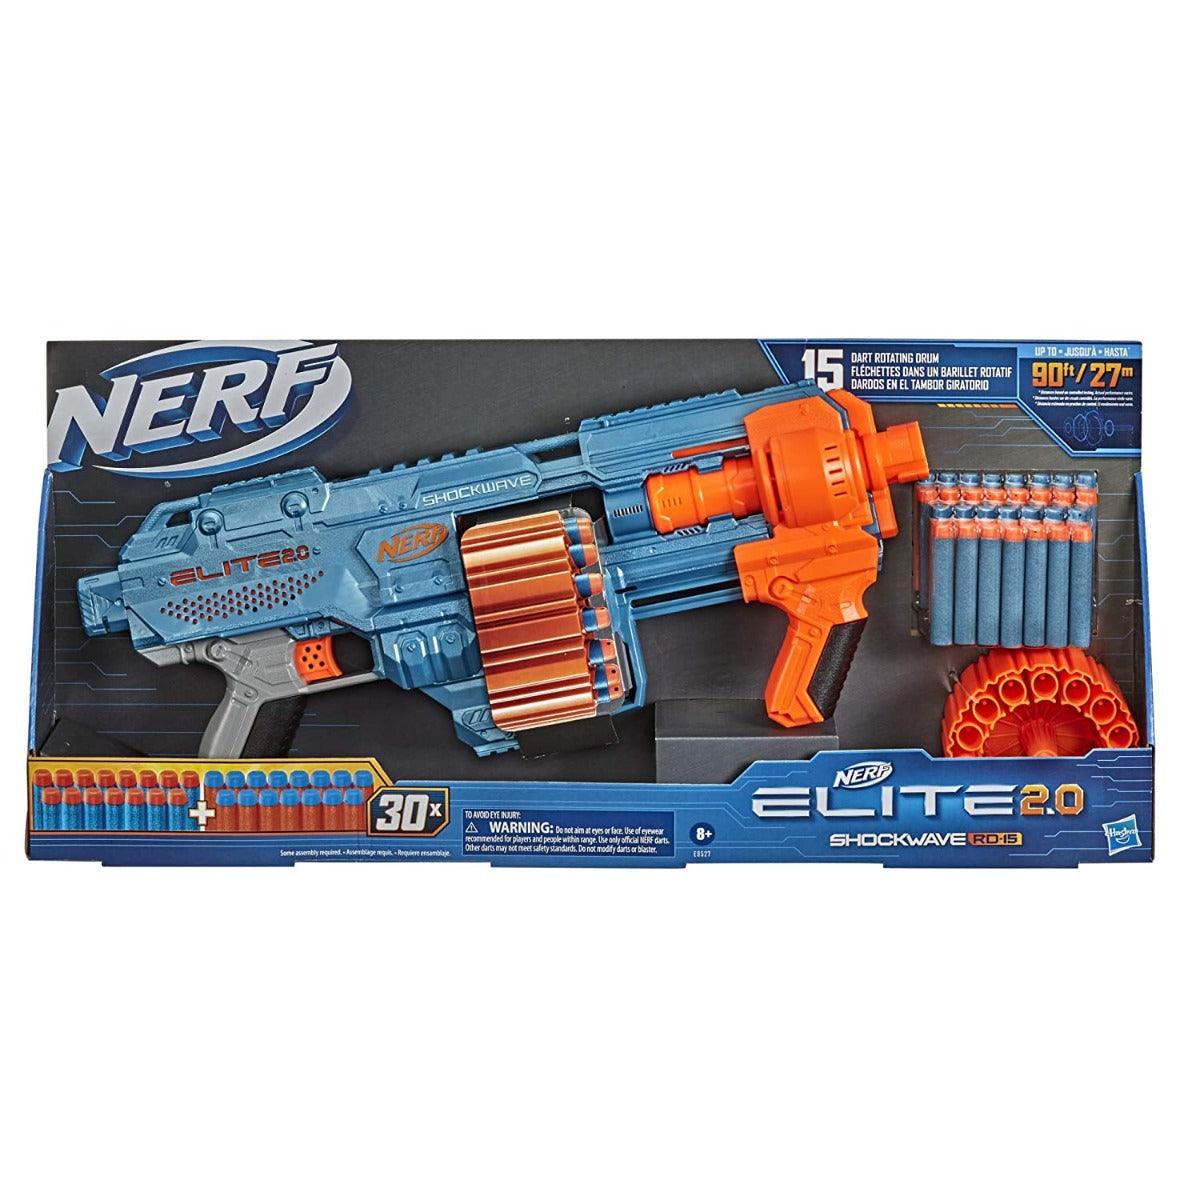 Nerf Elite 2.0 Shockwave RD-15 Toy Blaster, Official Nerf 30 Darts, Nerf 15-Dart Rotating Drum, Pump-Action, Toys for Kids, Teens, and Adults